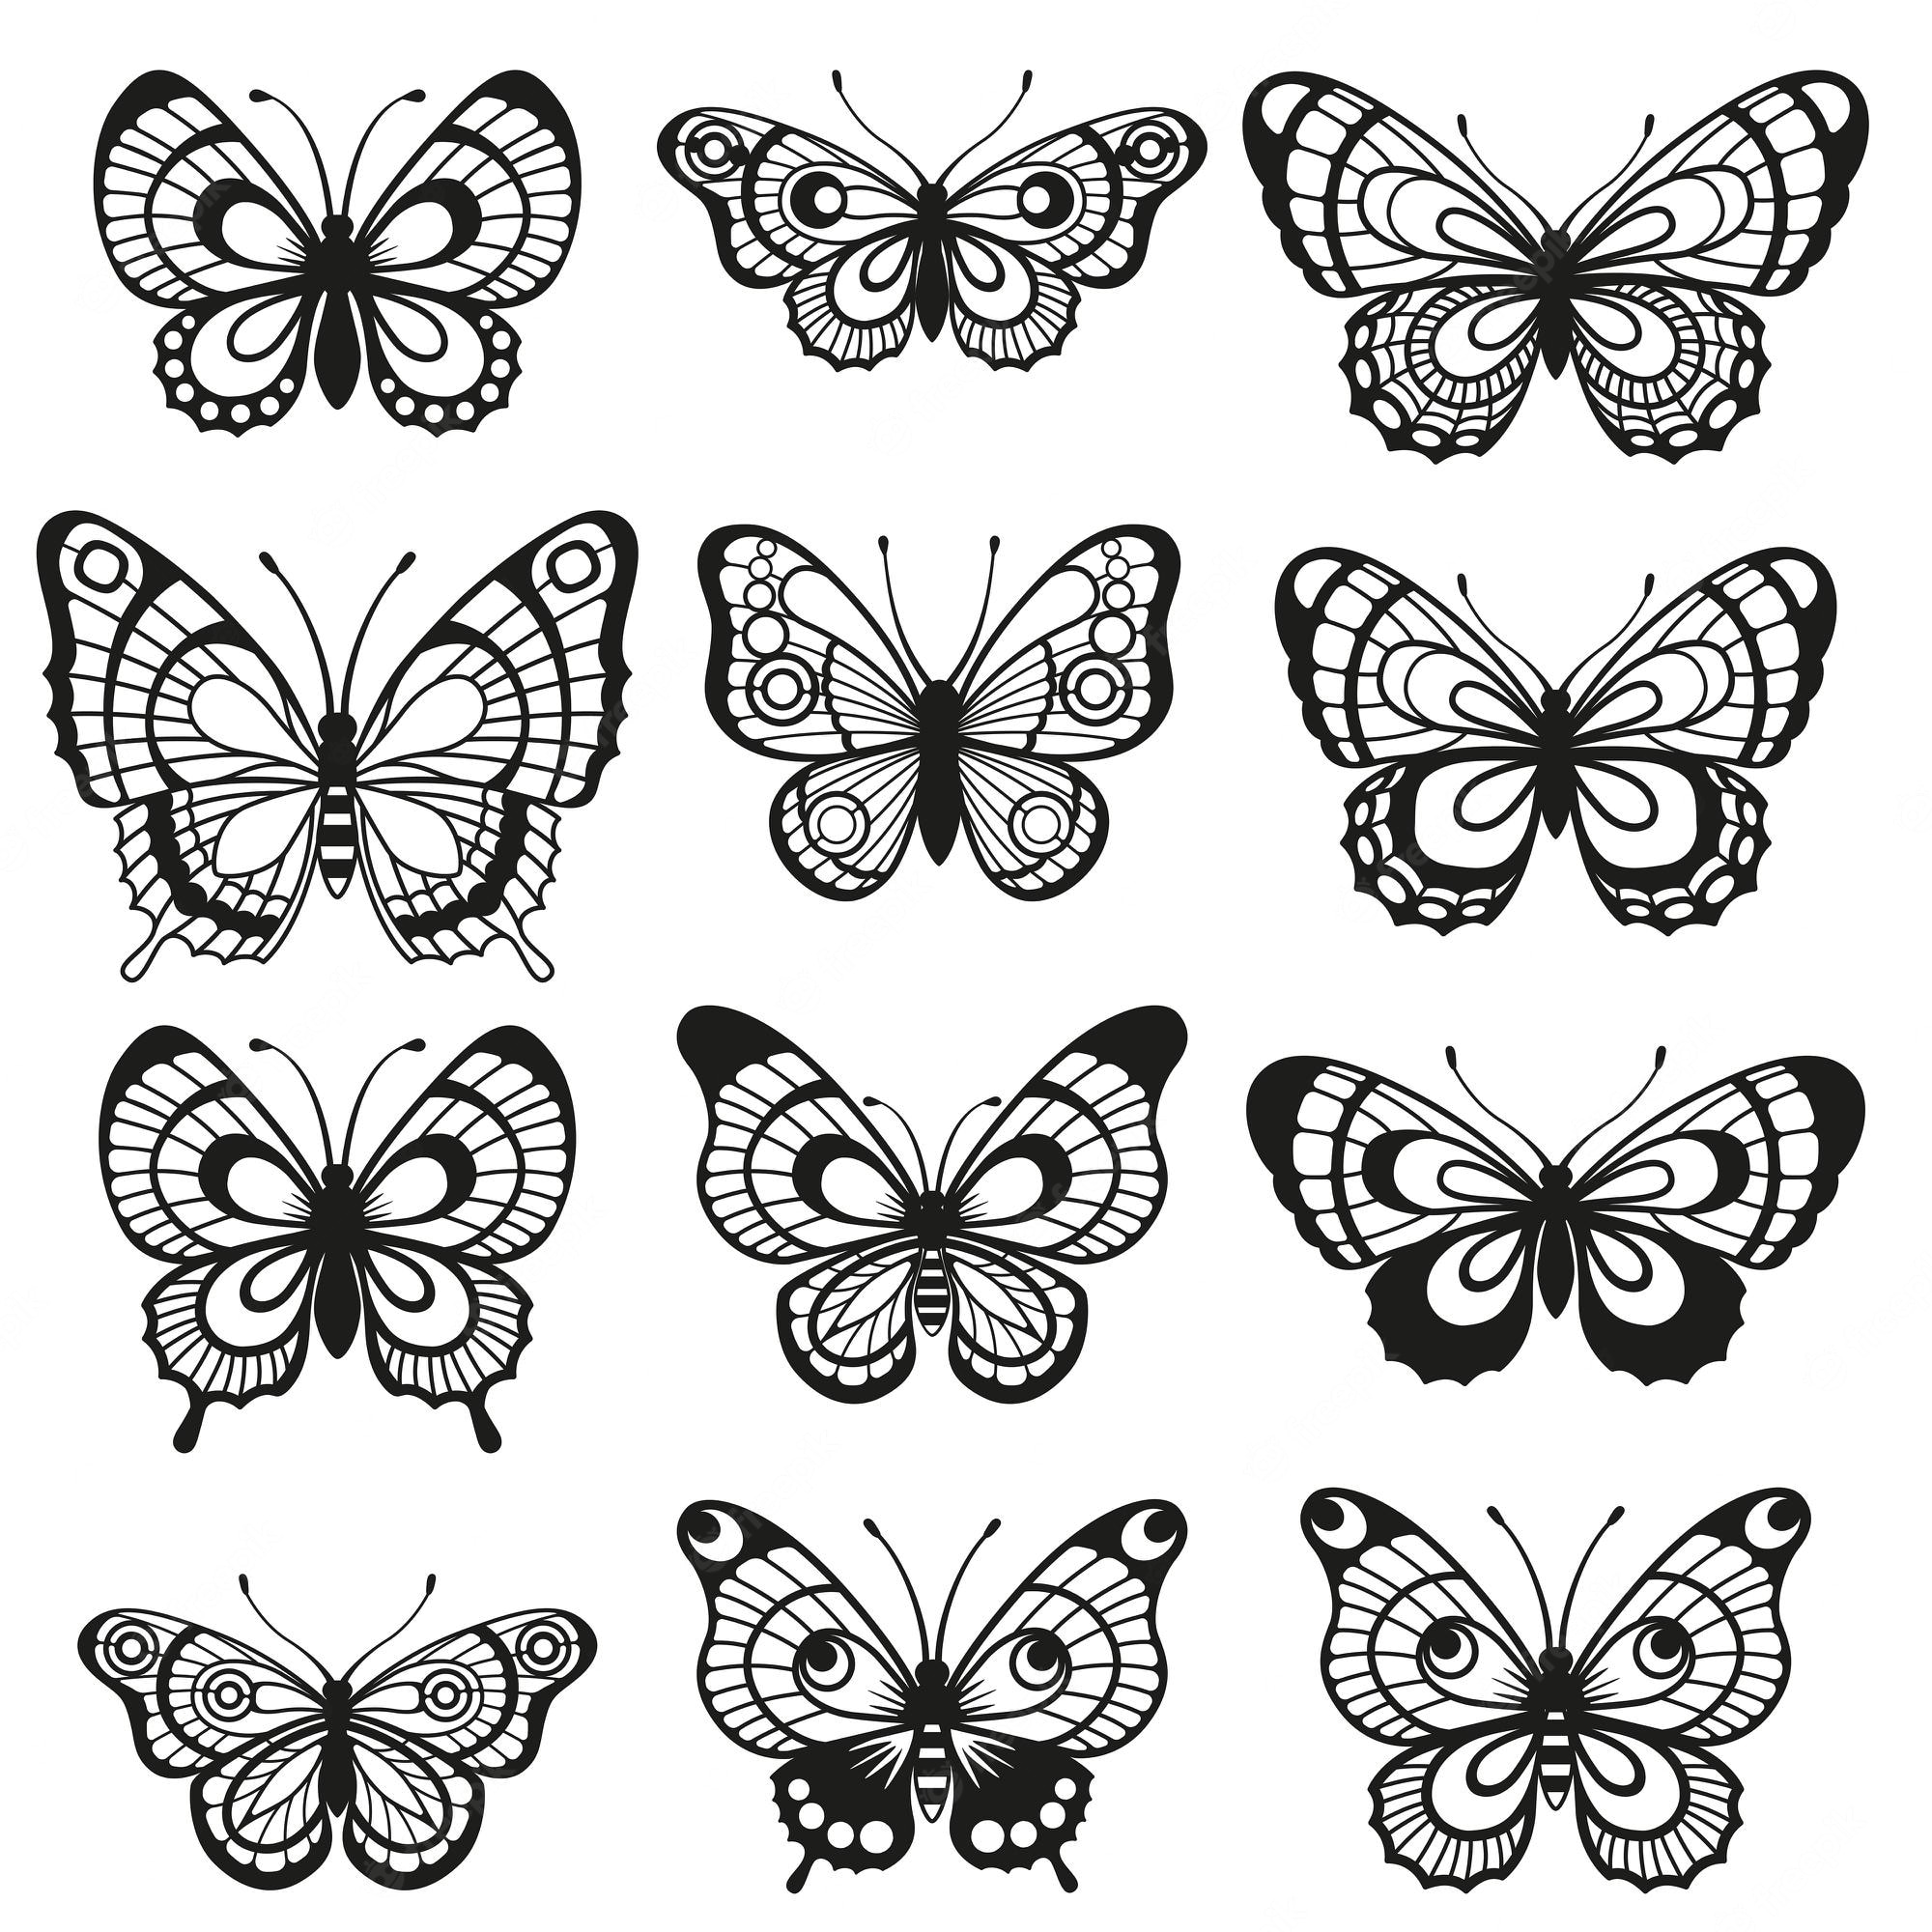 Butterfly Drawing Image. Free Vectors, & PSD